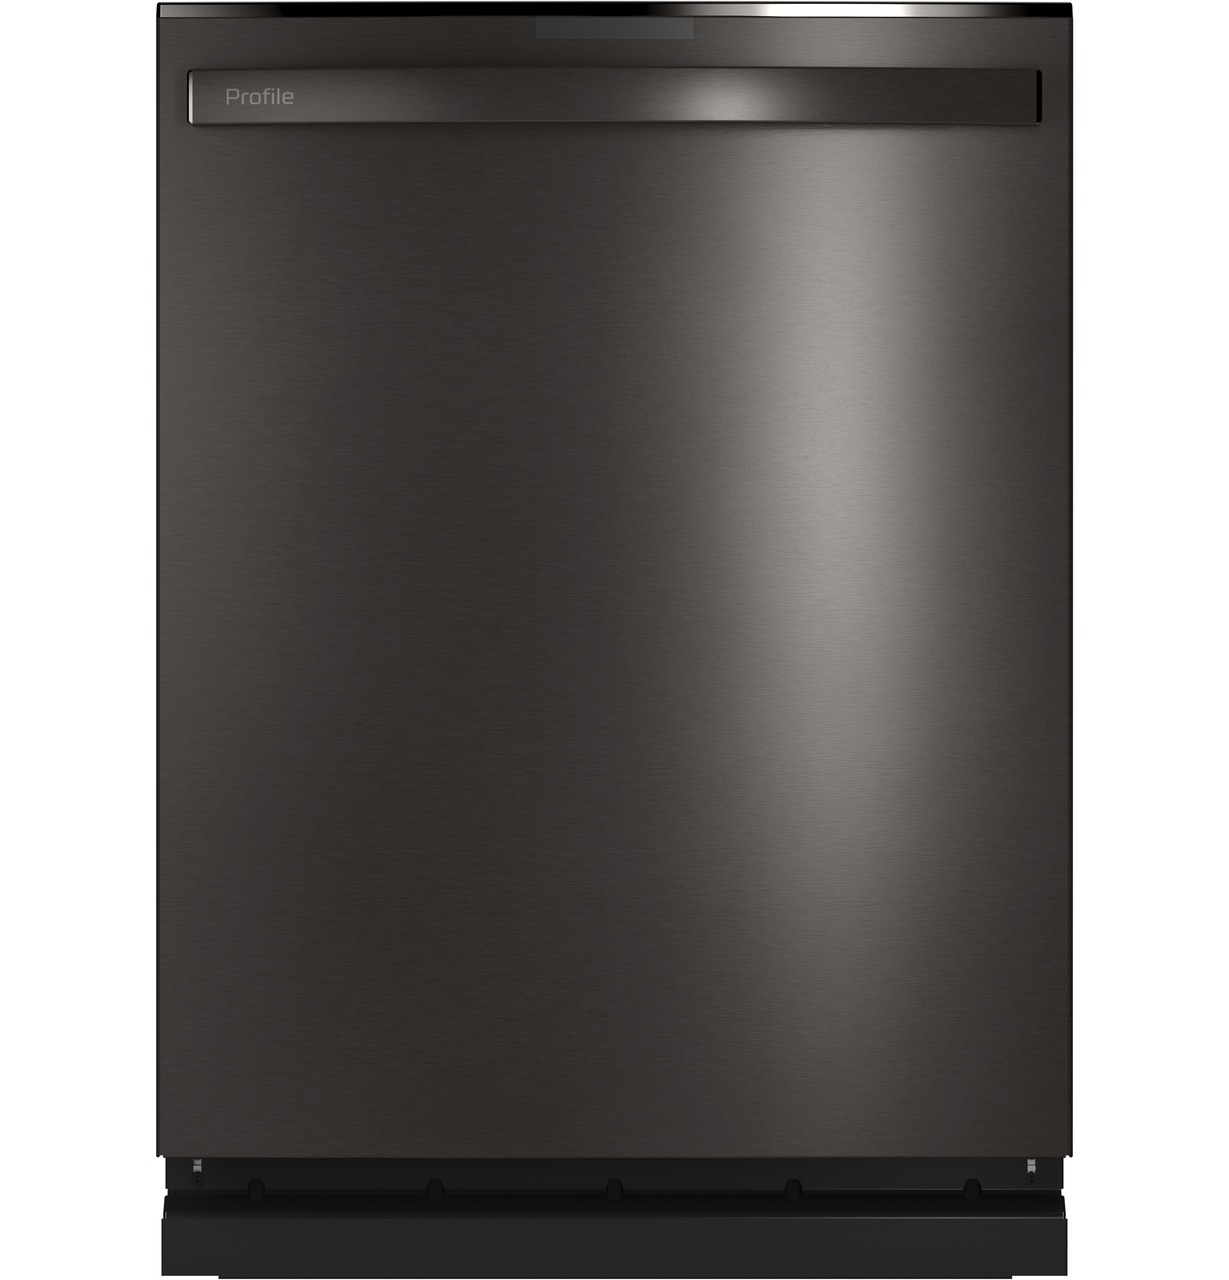 GE grey profile top control stainless steel interior dishwasher